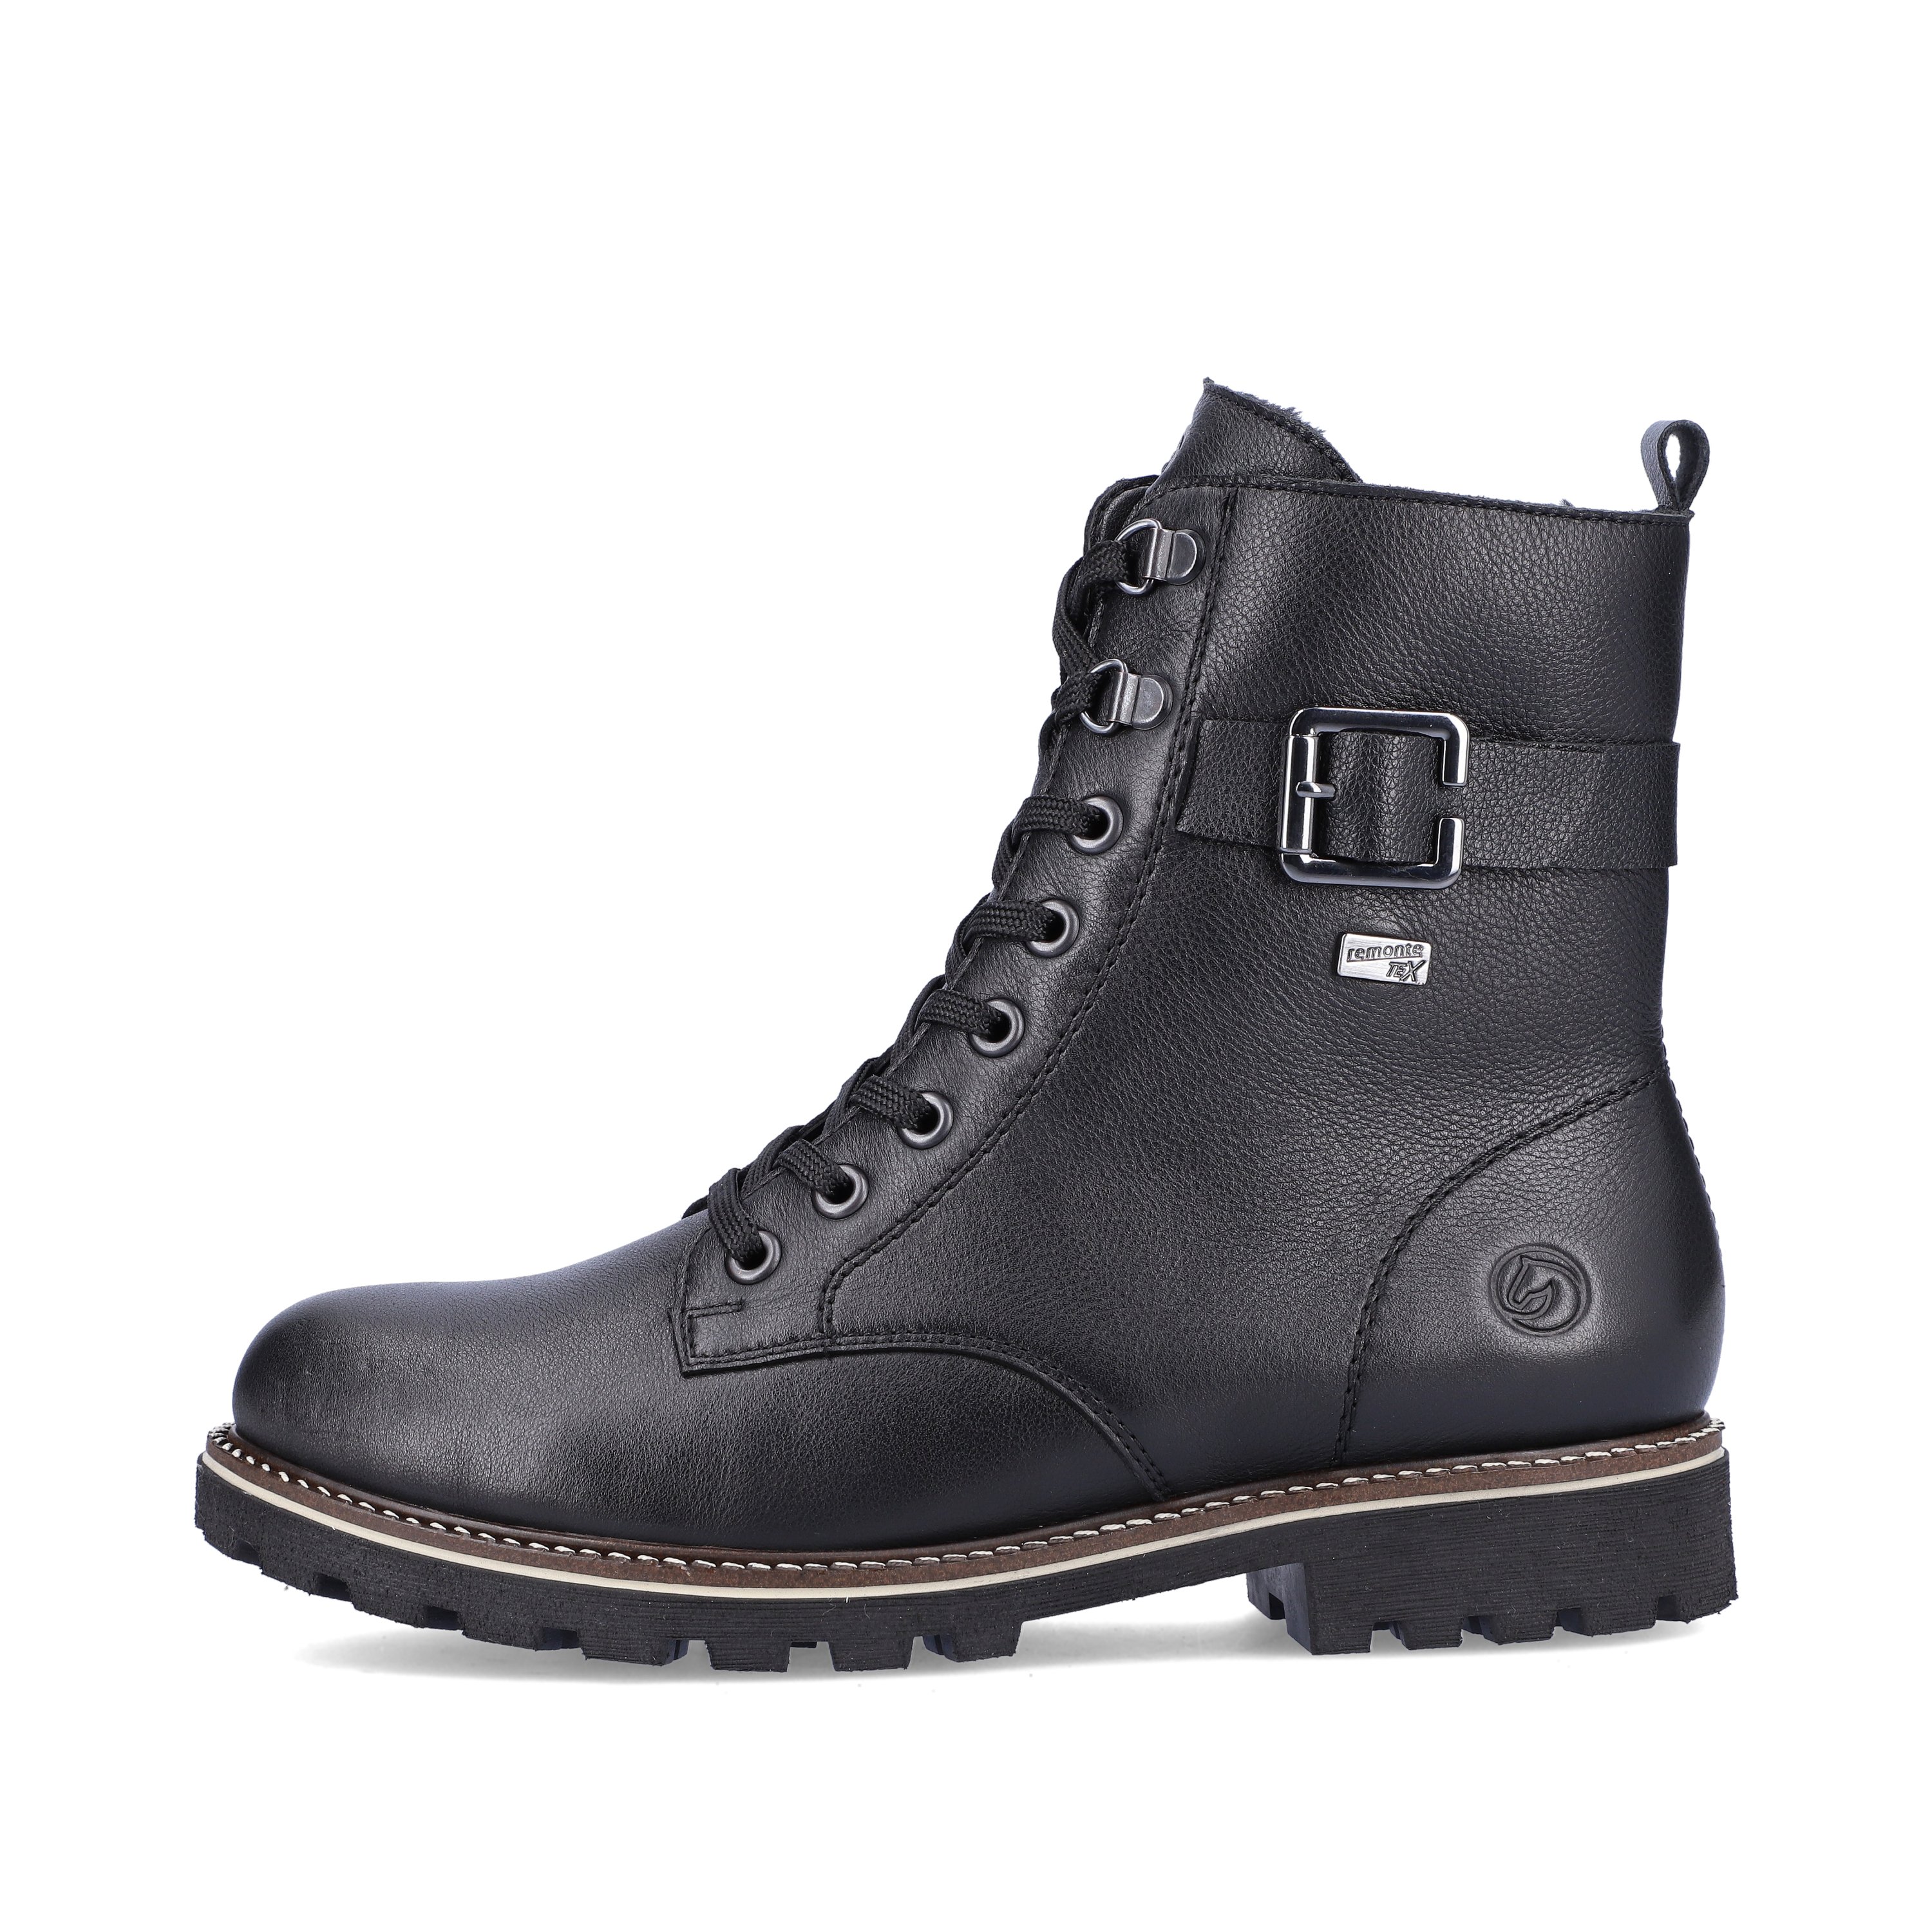 Black remonte women´s biker boots D8475-01 with cushioning and flexible profile sole. The outside of the shoe